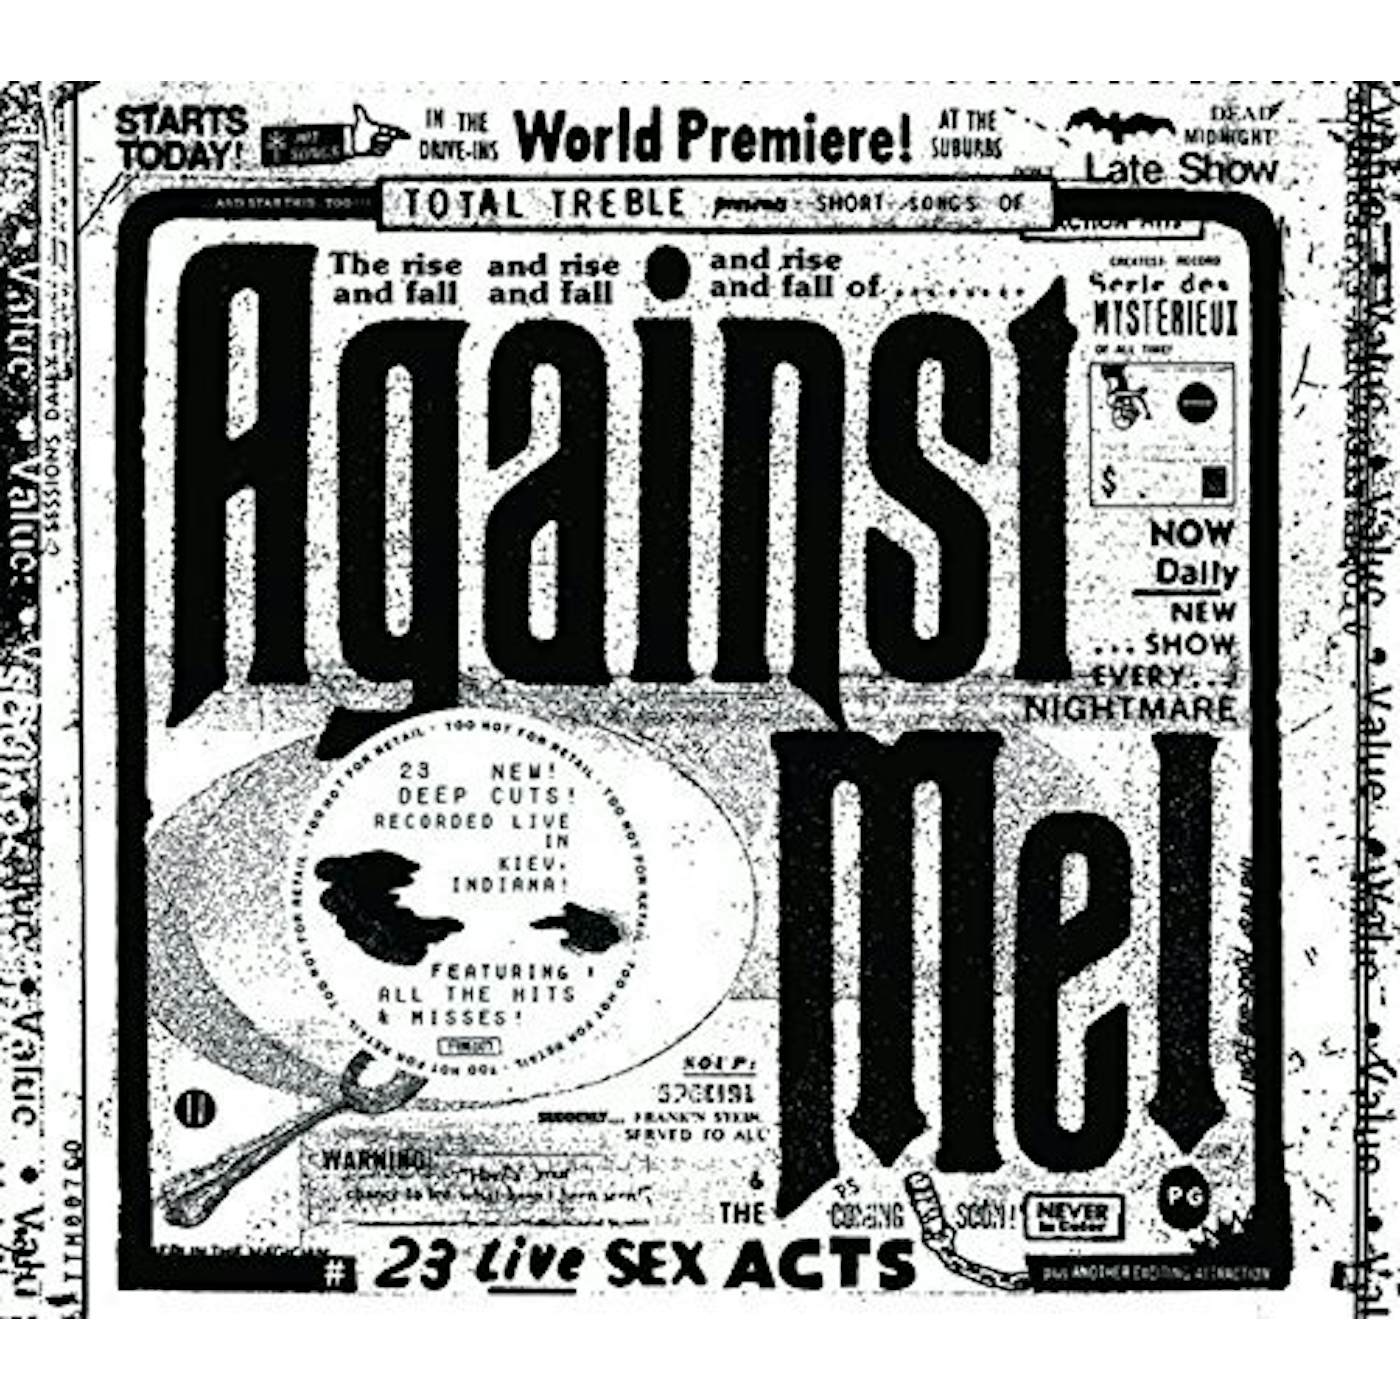 Against Me! 23 LIVE SEX ACTS CD